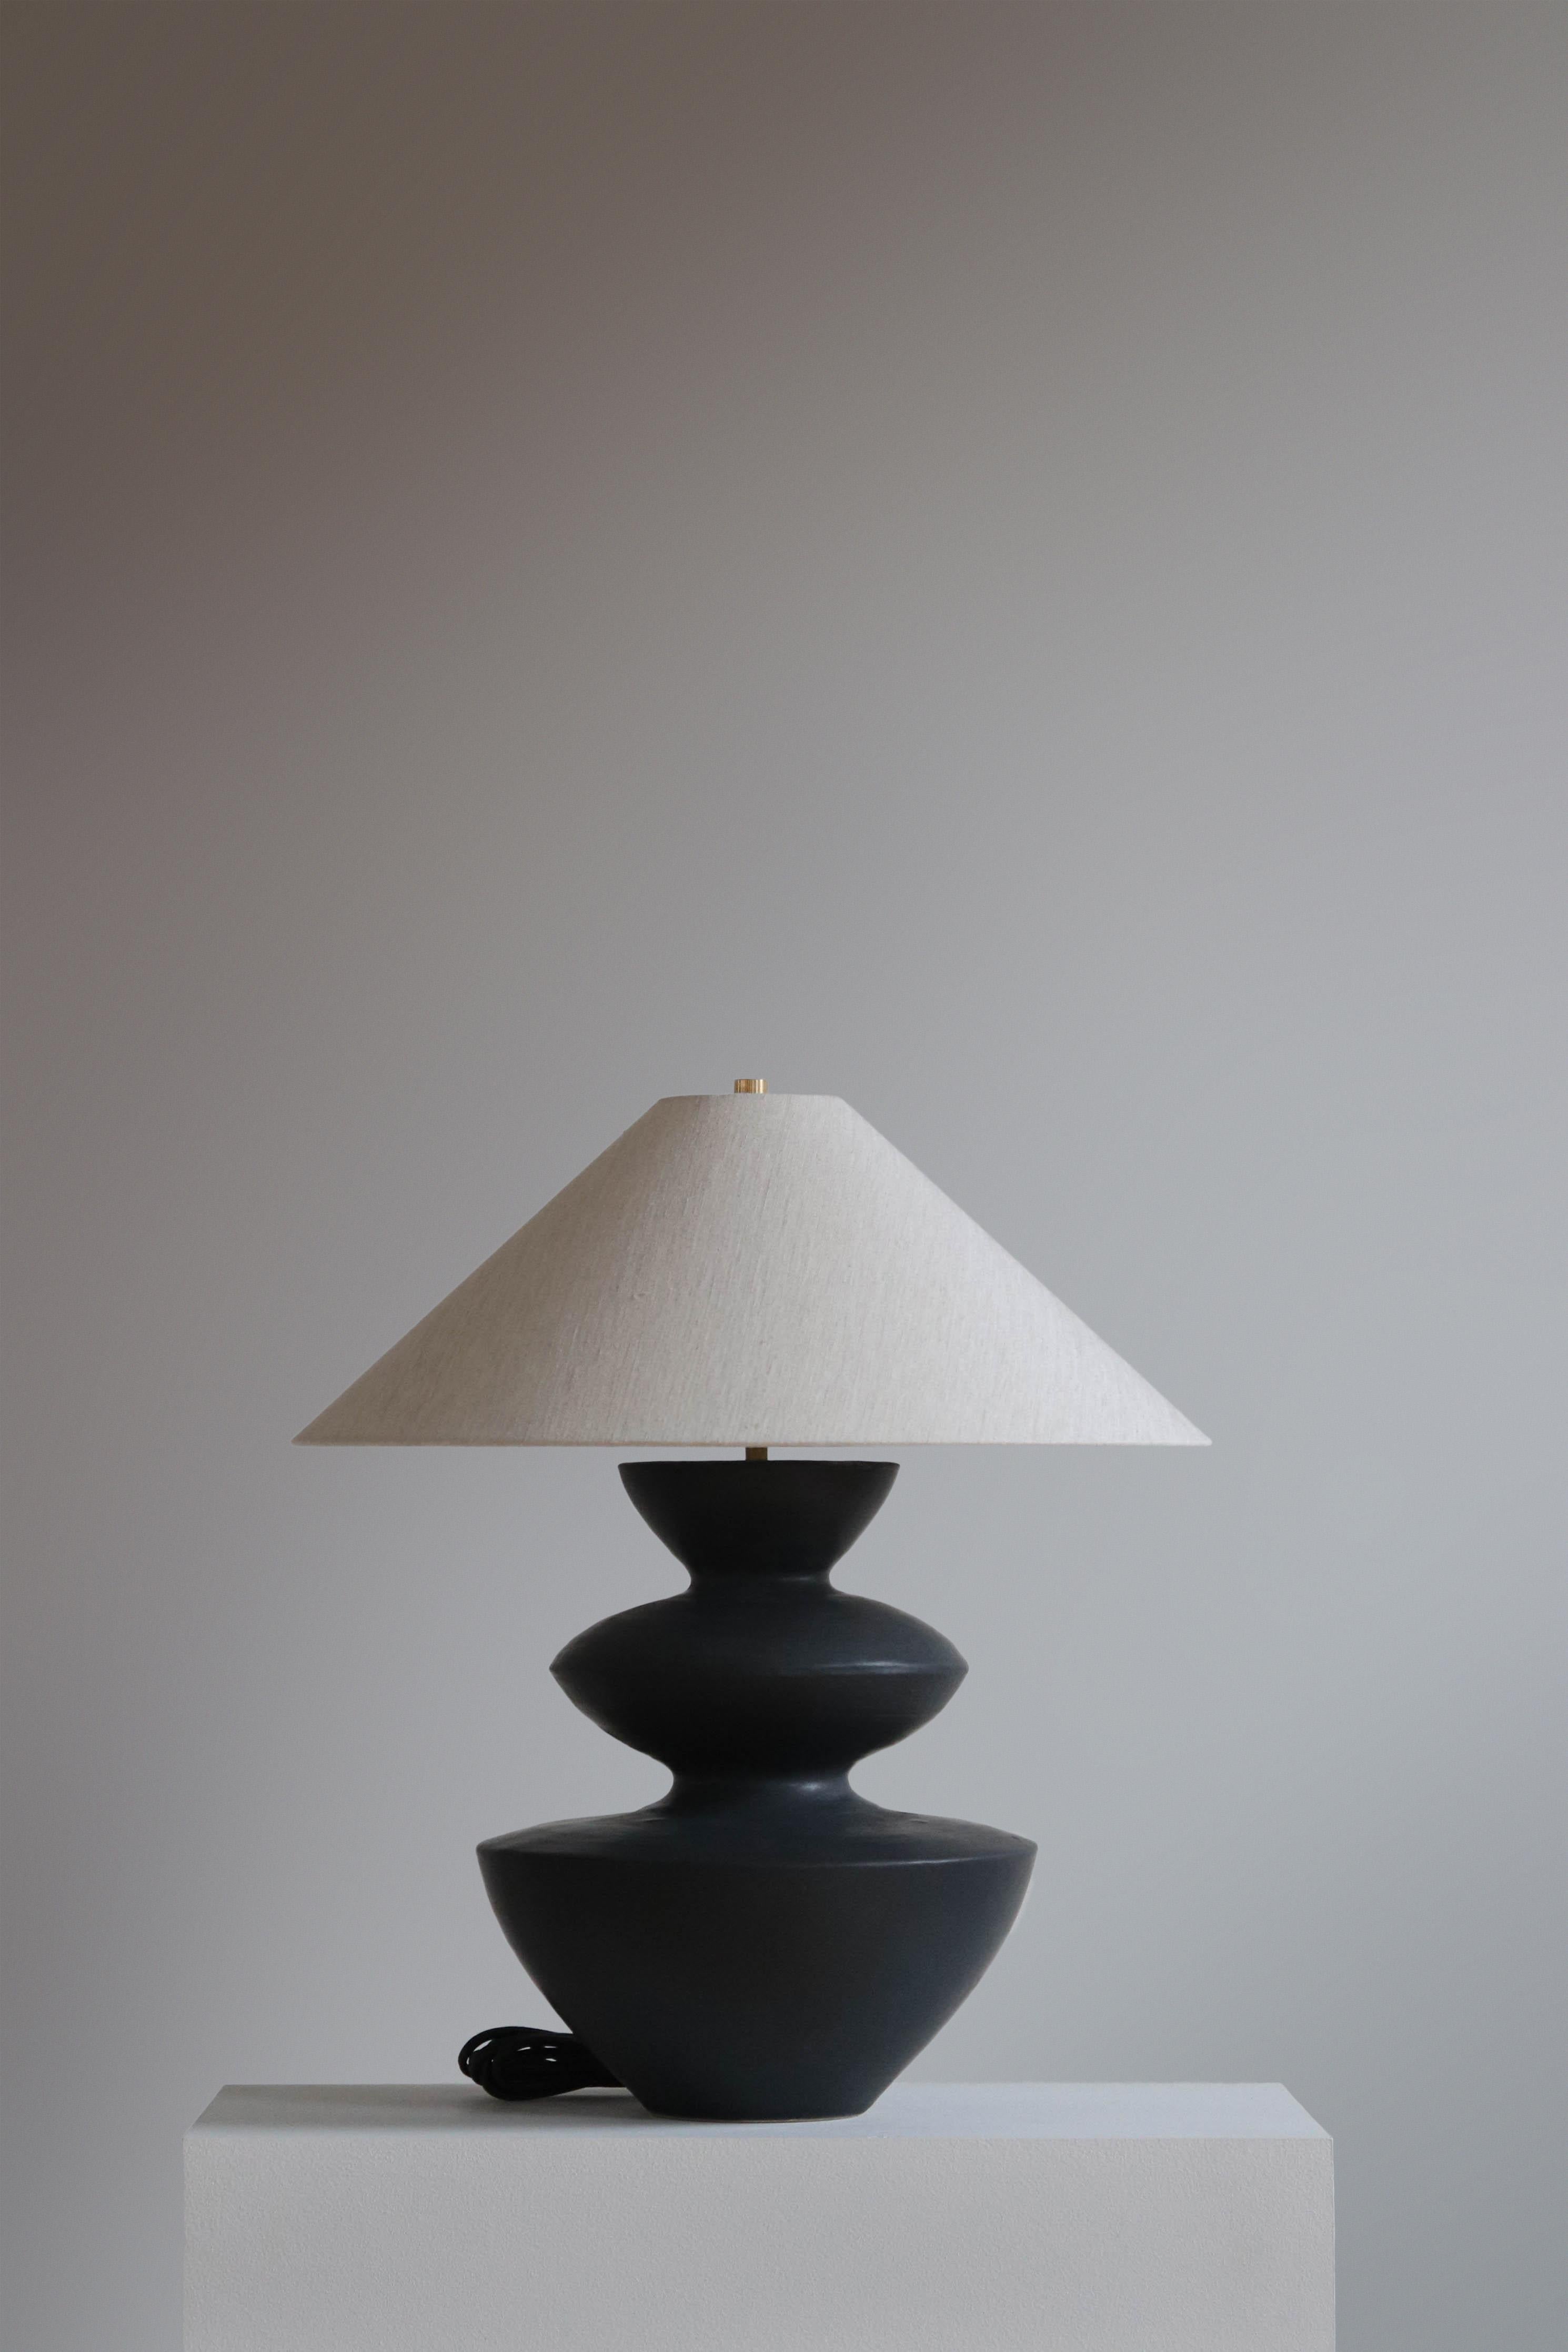 Anthracite Janus Table Lamp by Danny Kaplan Studio
Dimensions: ⌀ 51 x H 59 cm
Materials: Glazed Ceramic, Unfinished Brass, Linen

This item is handmade, and may exhibit variability within the same piece. We do our best to maintain a consistent